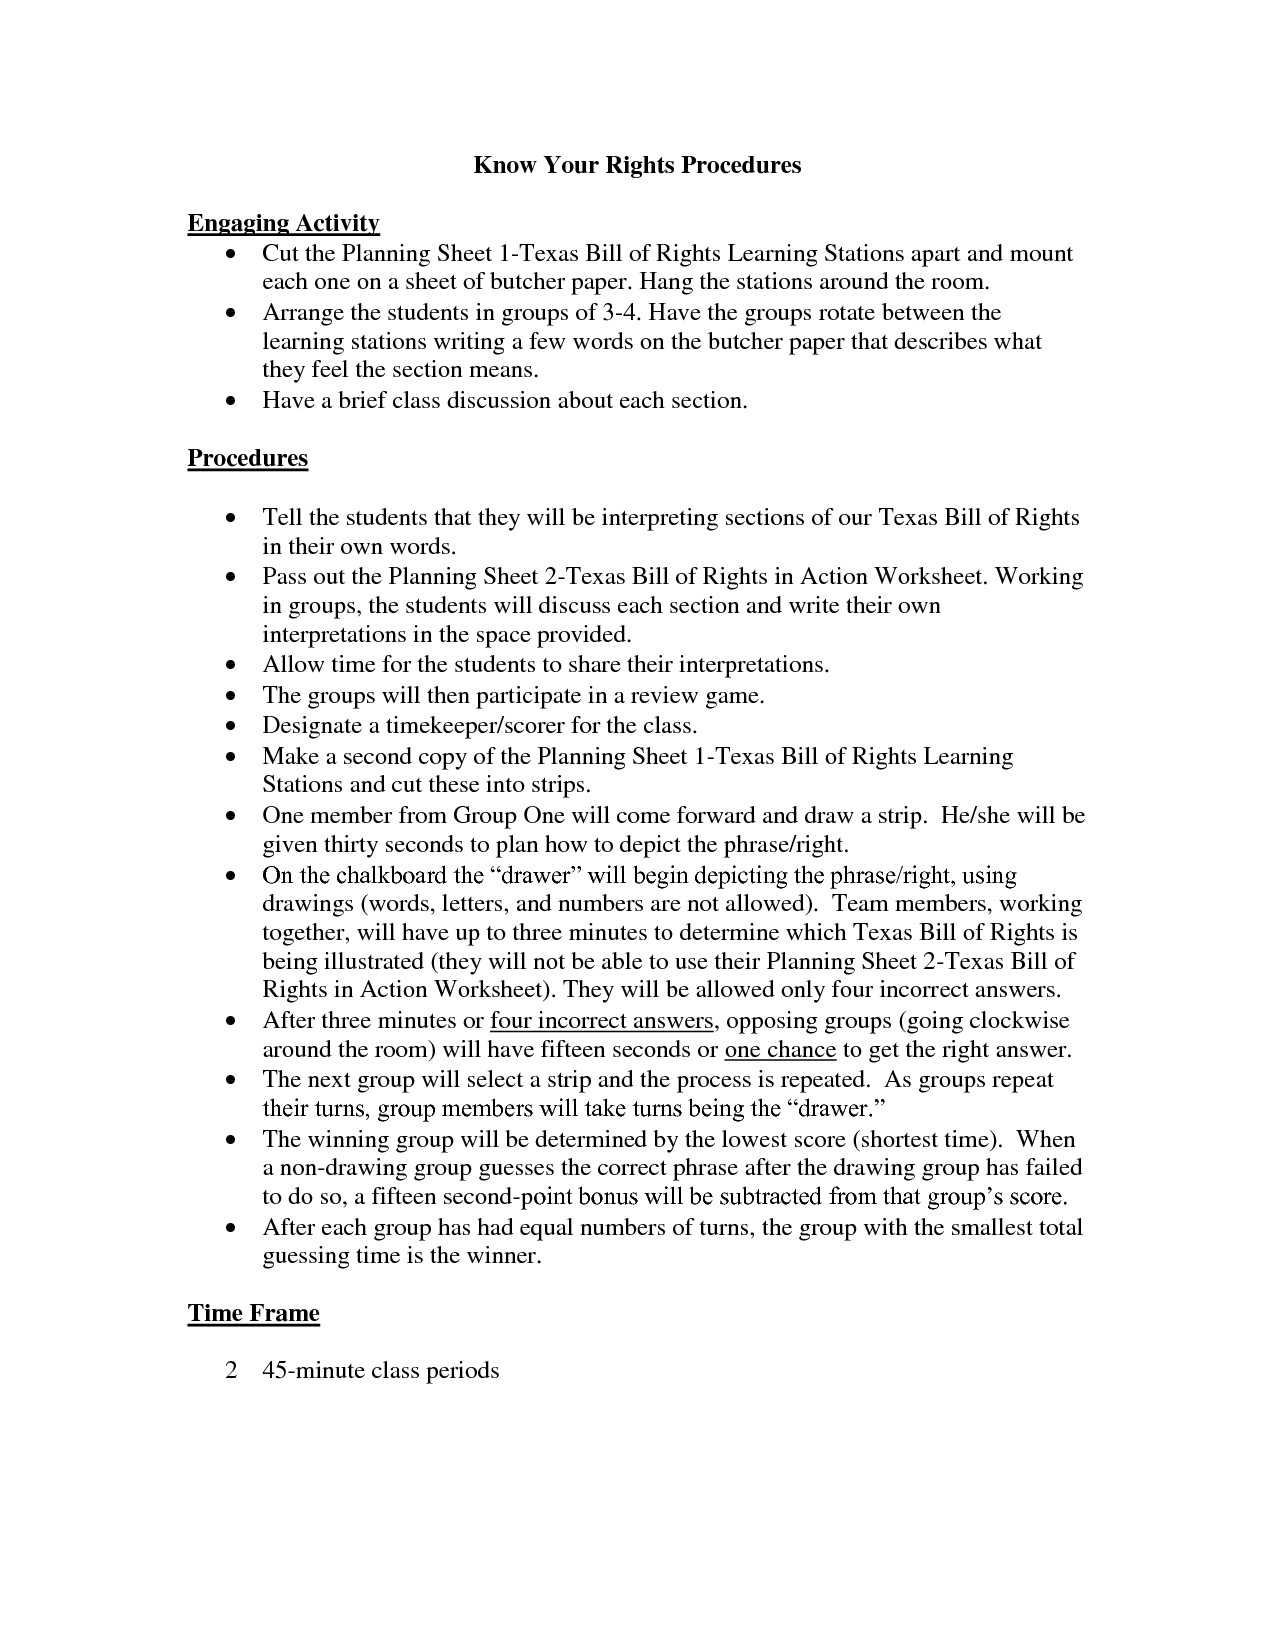 Criminal Law Worksheets as Well as Bill Rights Amendments Worksheet Luxury 15 Best Bill Rights